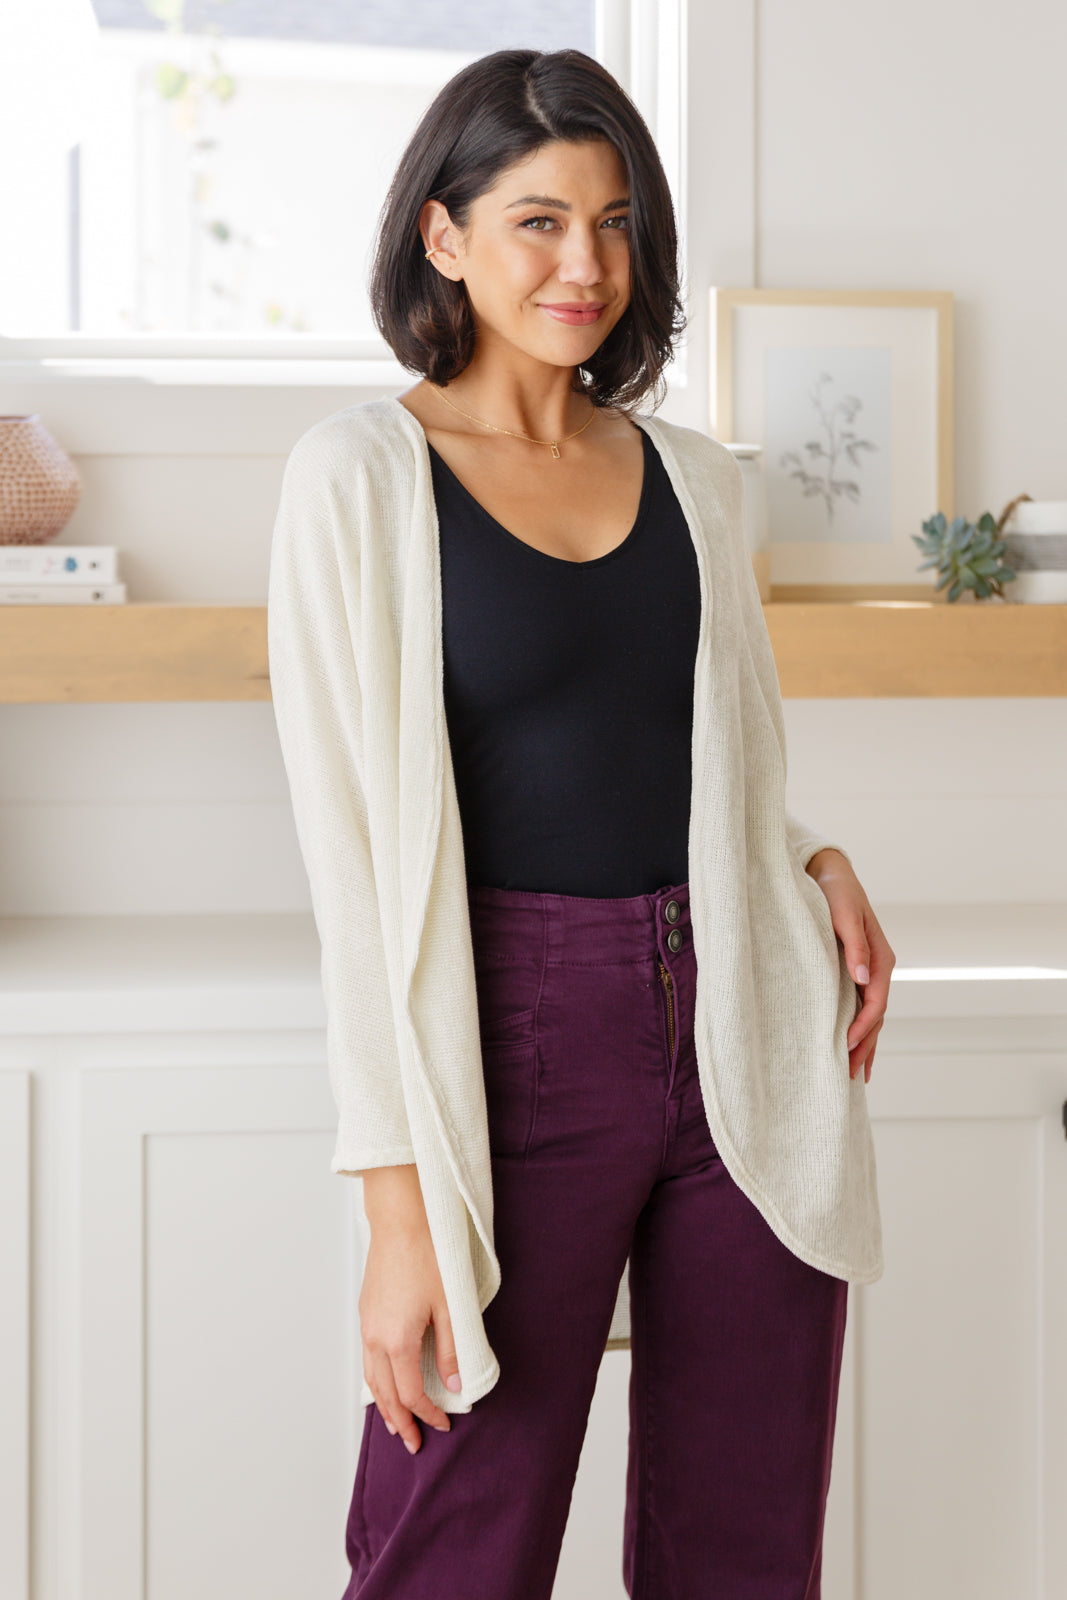 Make a statement in the How's It Going Open Front Cardigan. Crafted with lightweight sweater knit fabric for a classic look, this cardigan features a fluid open-front design and long, dolman sleeves with curved hem. Feel the freedom of unrestricted mobility and unparalleled style, all-in-one. S - 3X